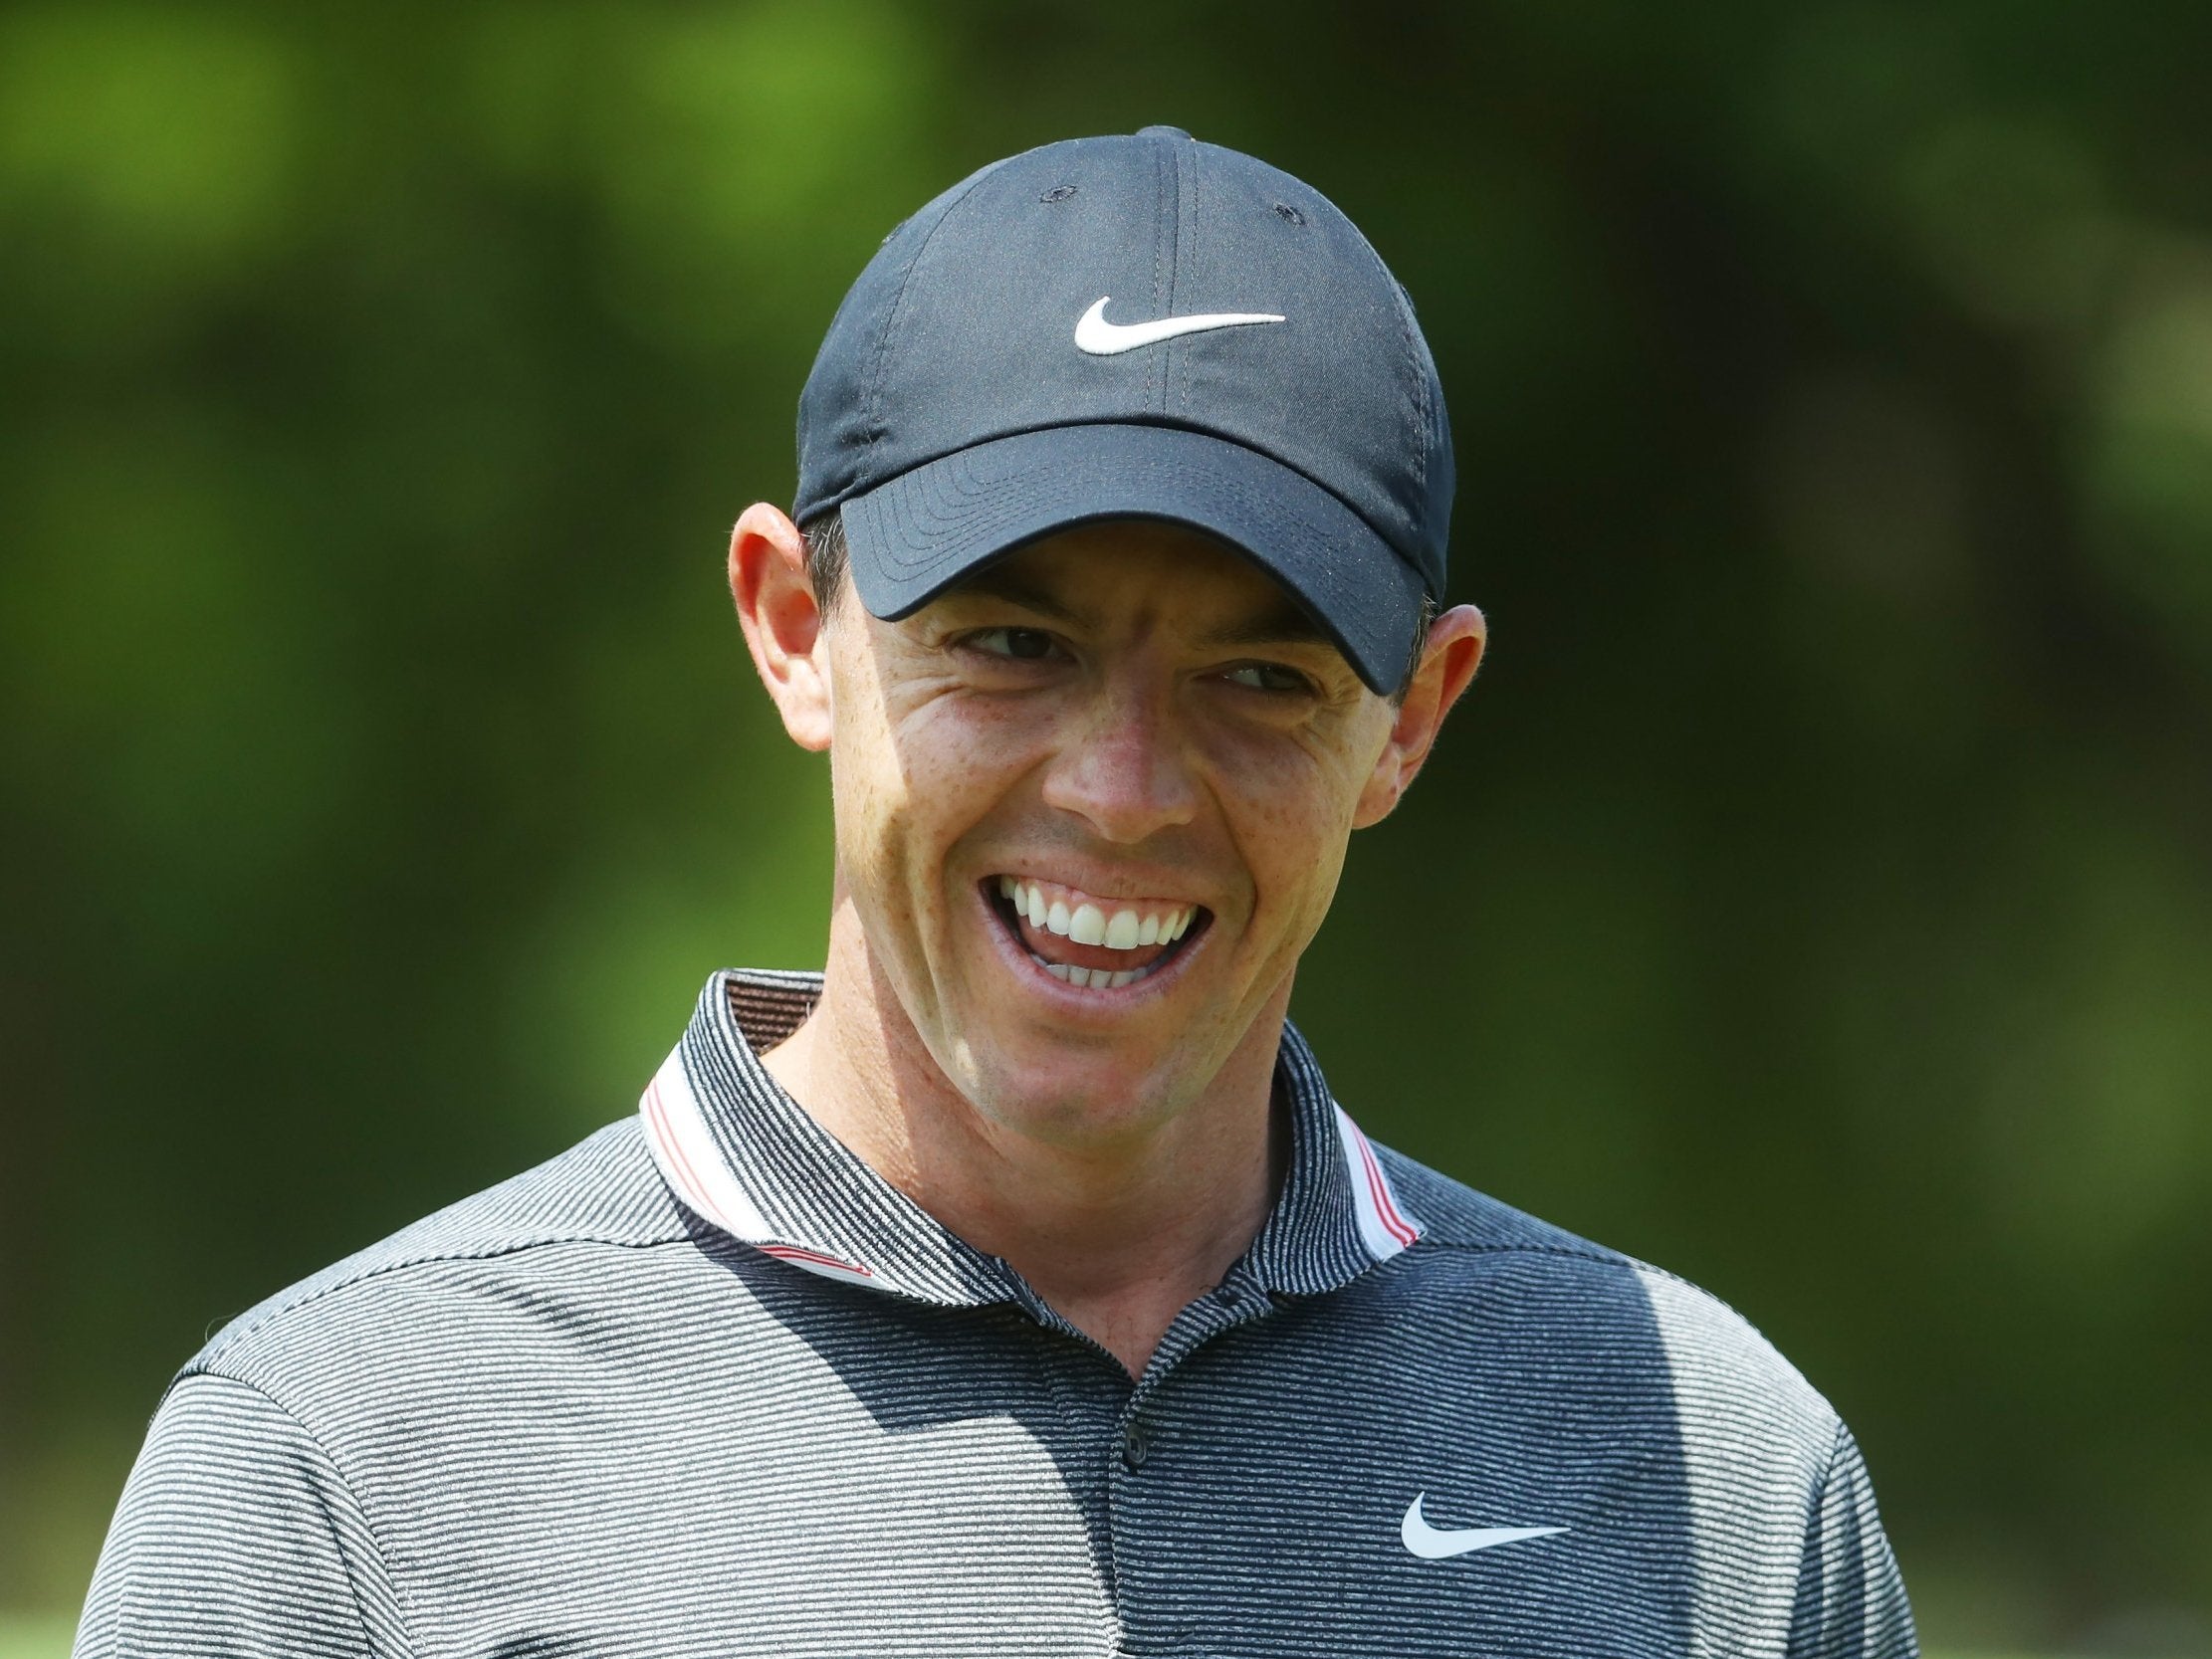 Rory McIlroy has enjoyed one of his strongest runs of form